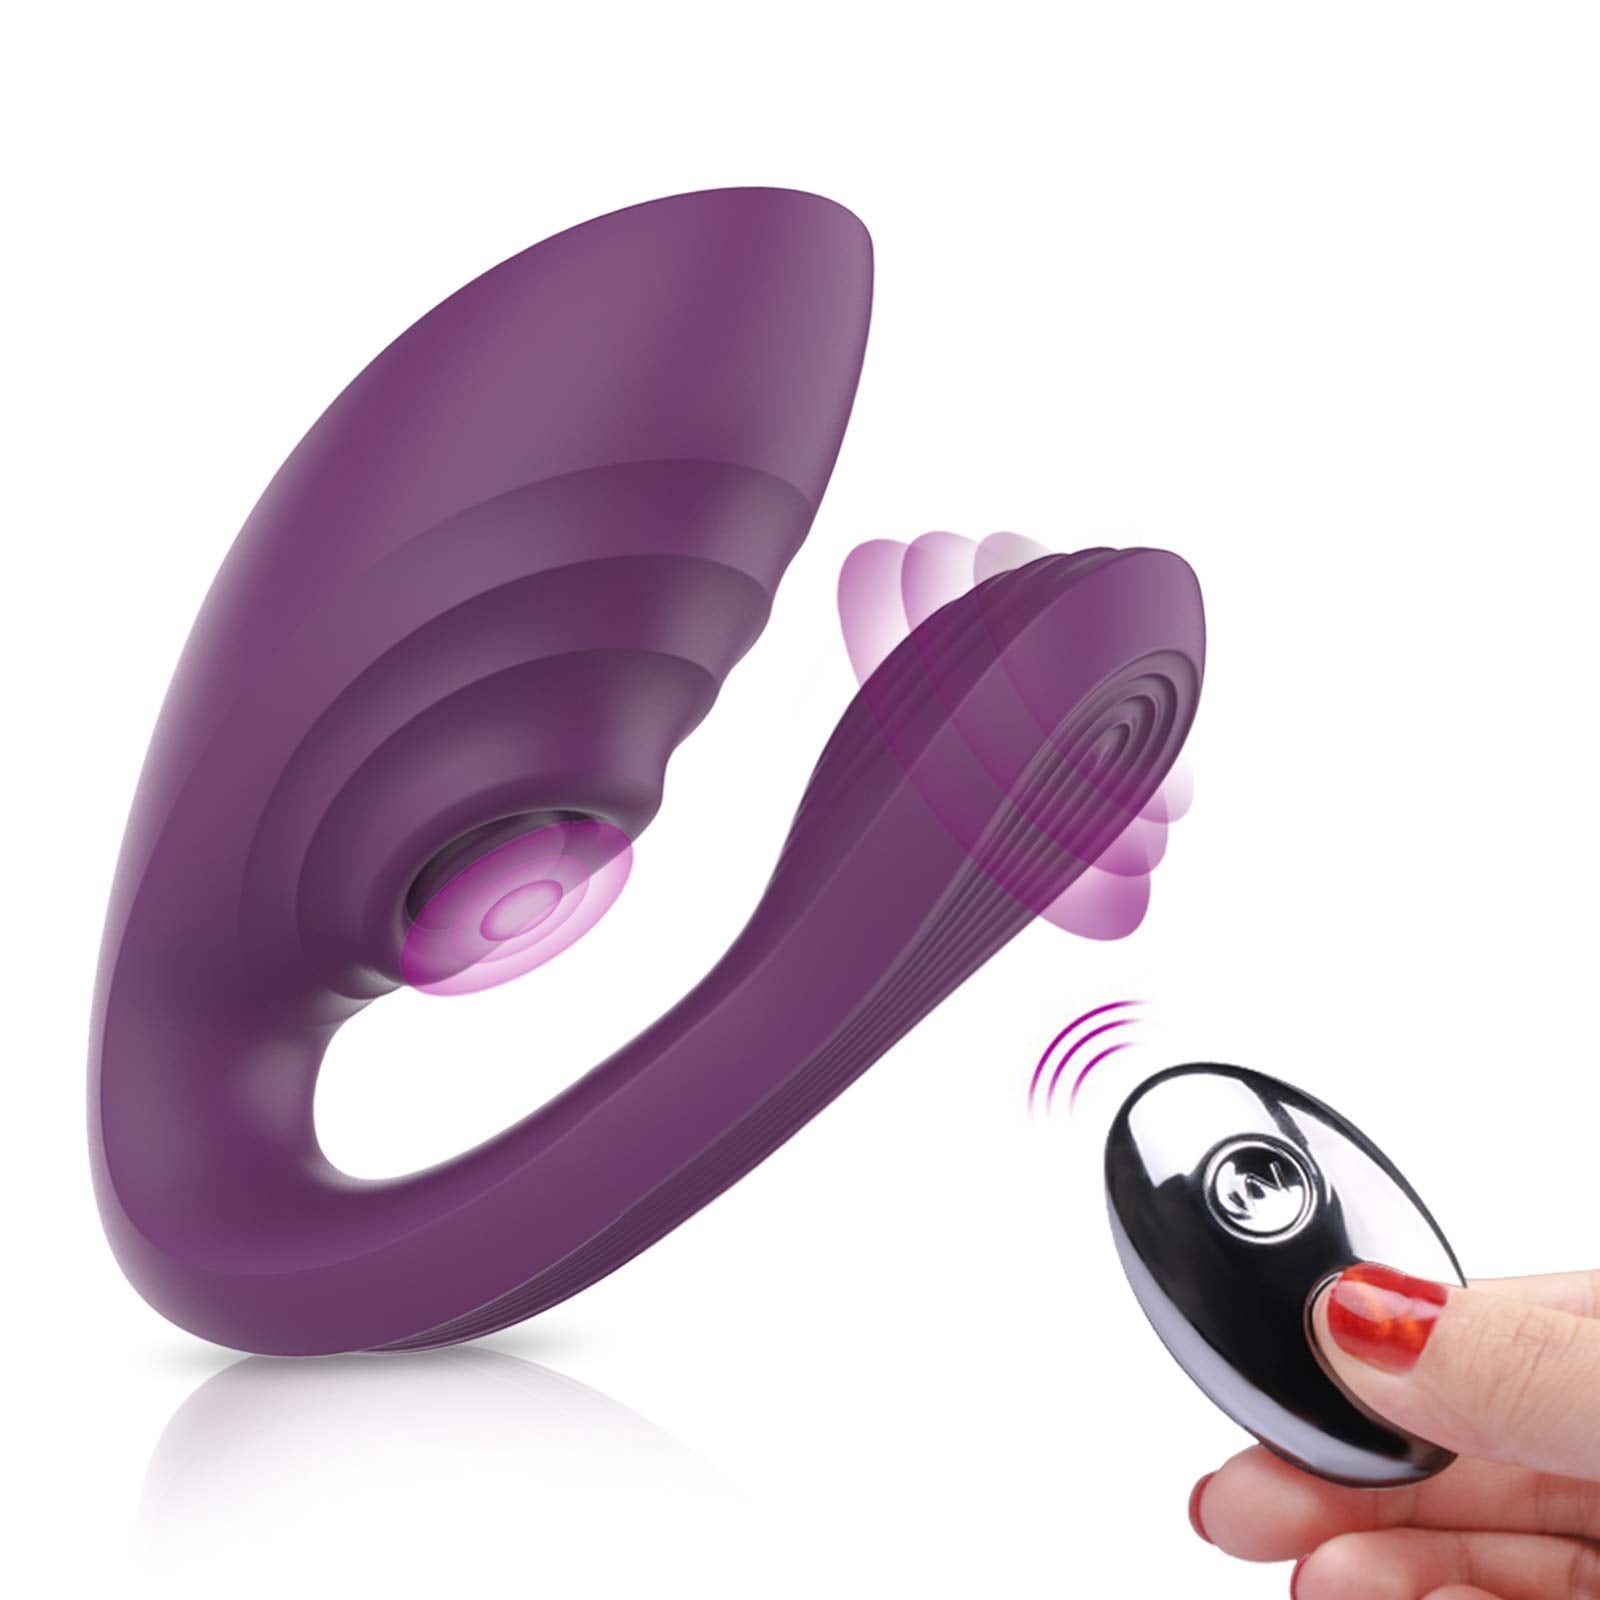 23 Sex Toys You Can Buy On Amazon Prime